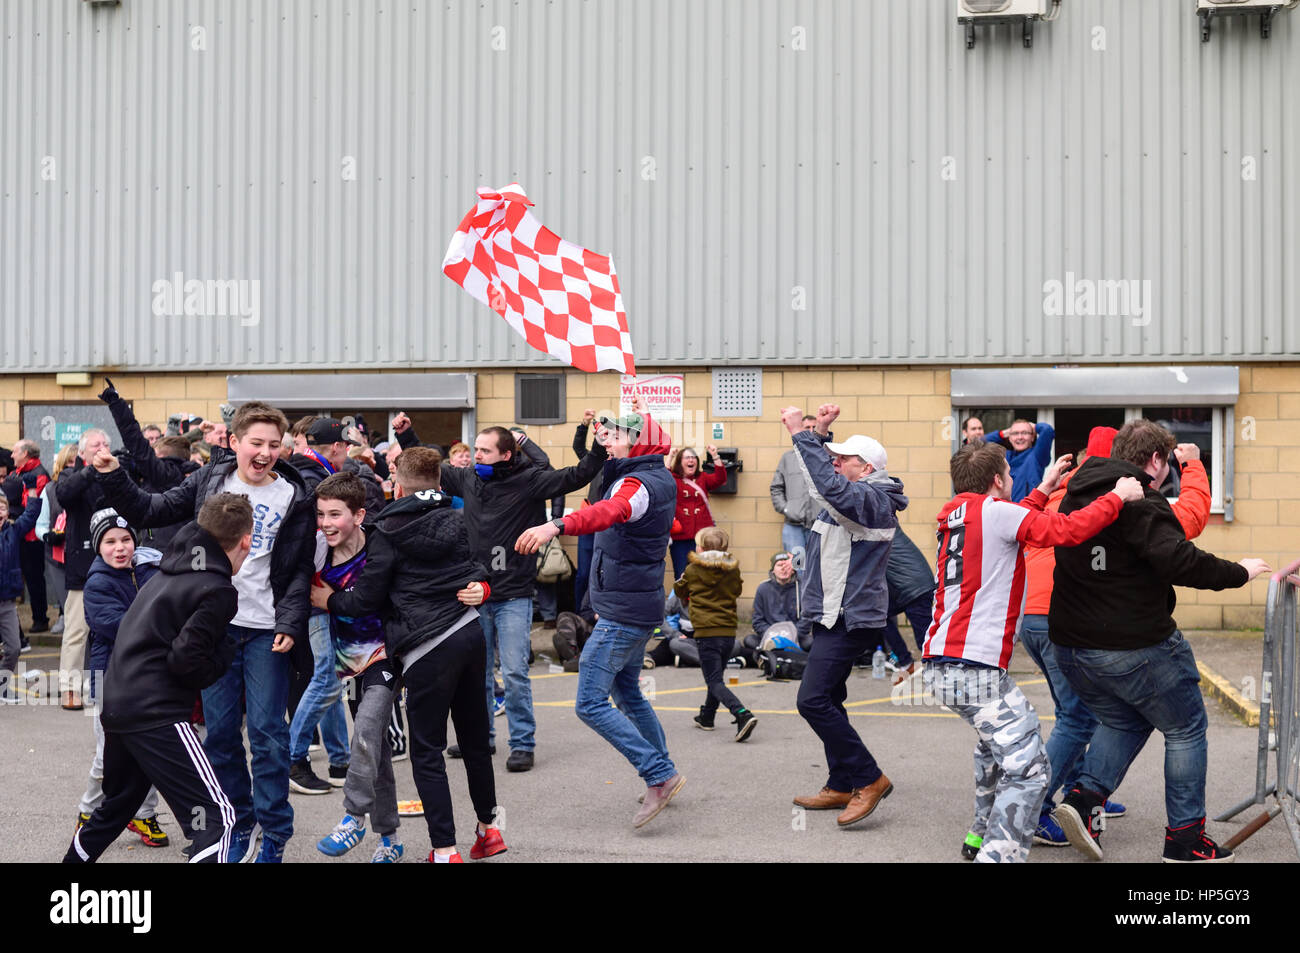 Lincoln, UK. 18th Feb, 2017. Non-league Lincoln city FC supporters celebrate shock win over Premier League club Burnley and a place in the FA Cup quarter-finals. Fans celebrate outside Sincil bank stadium home of the Imps, after watching the game via large screen TV. Credit: Ian Francis/Alamy Live News Stock Photo